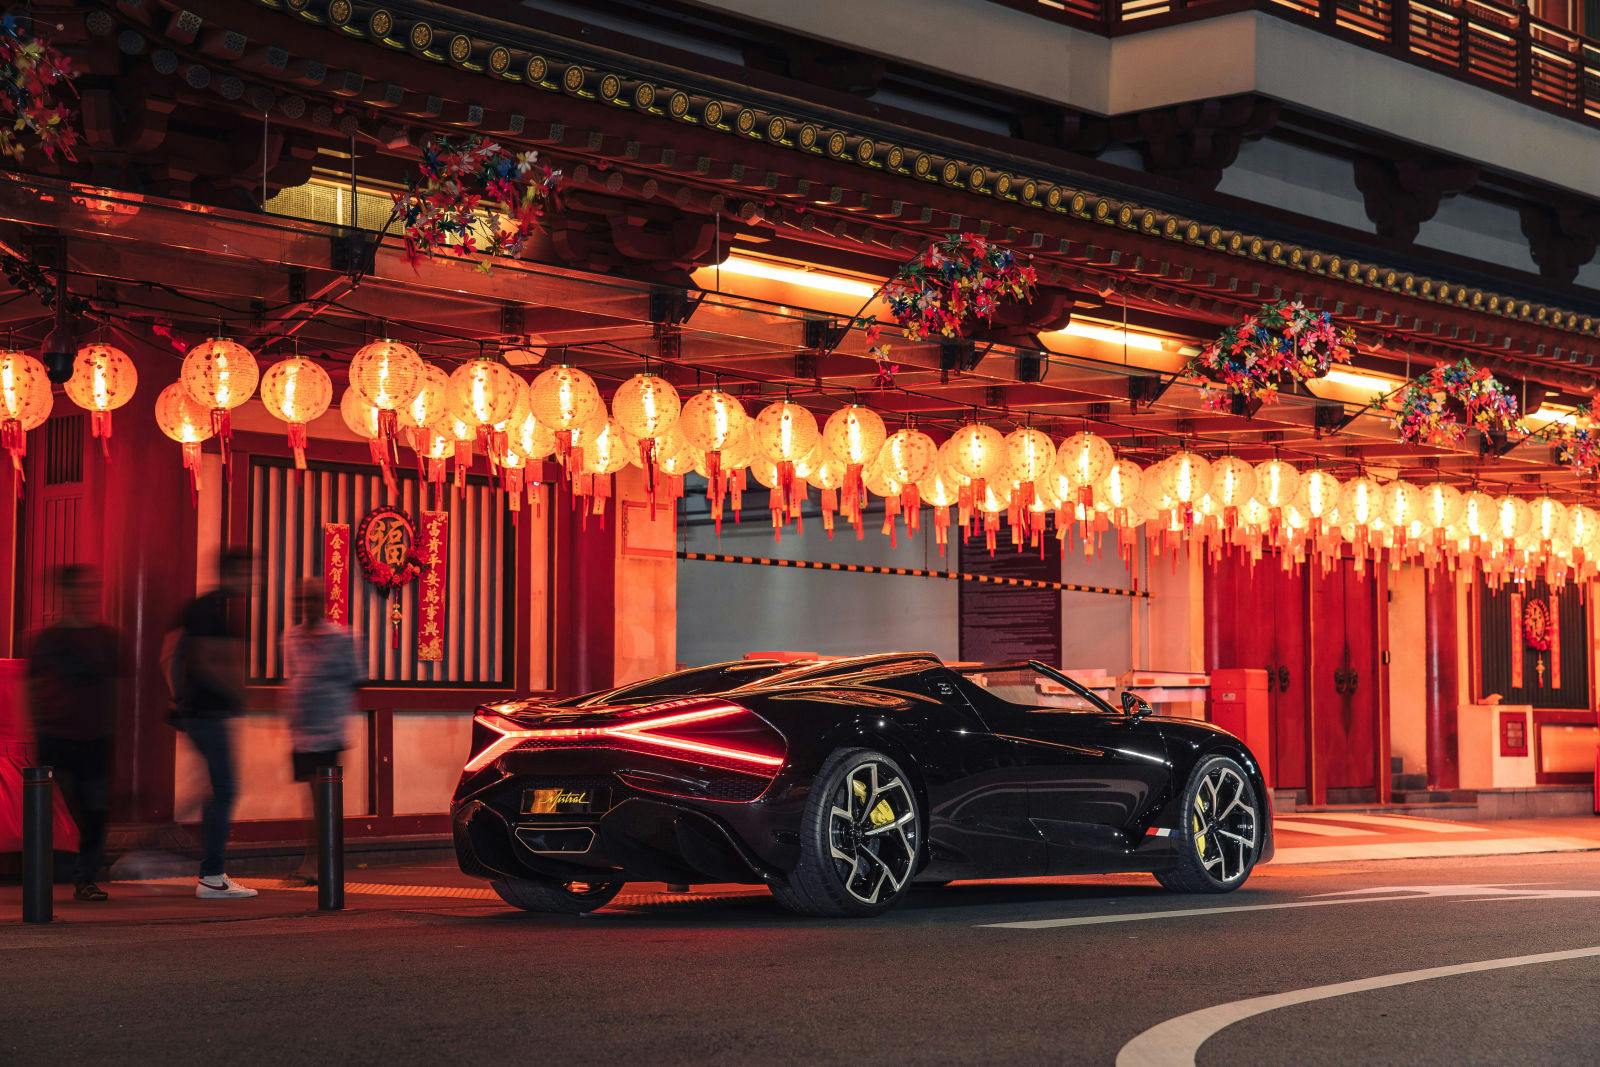 At the Buddha Tooth Relic Temple, onlookers stop to admire the Bugatti W16 Mistral.